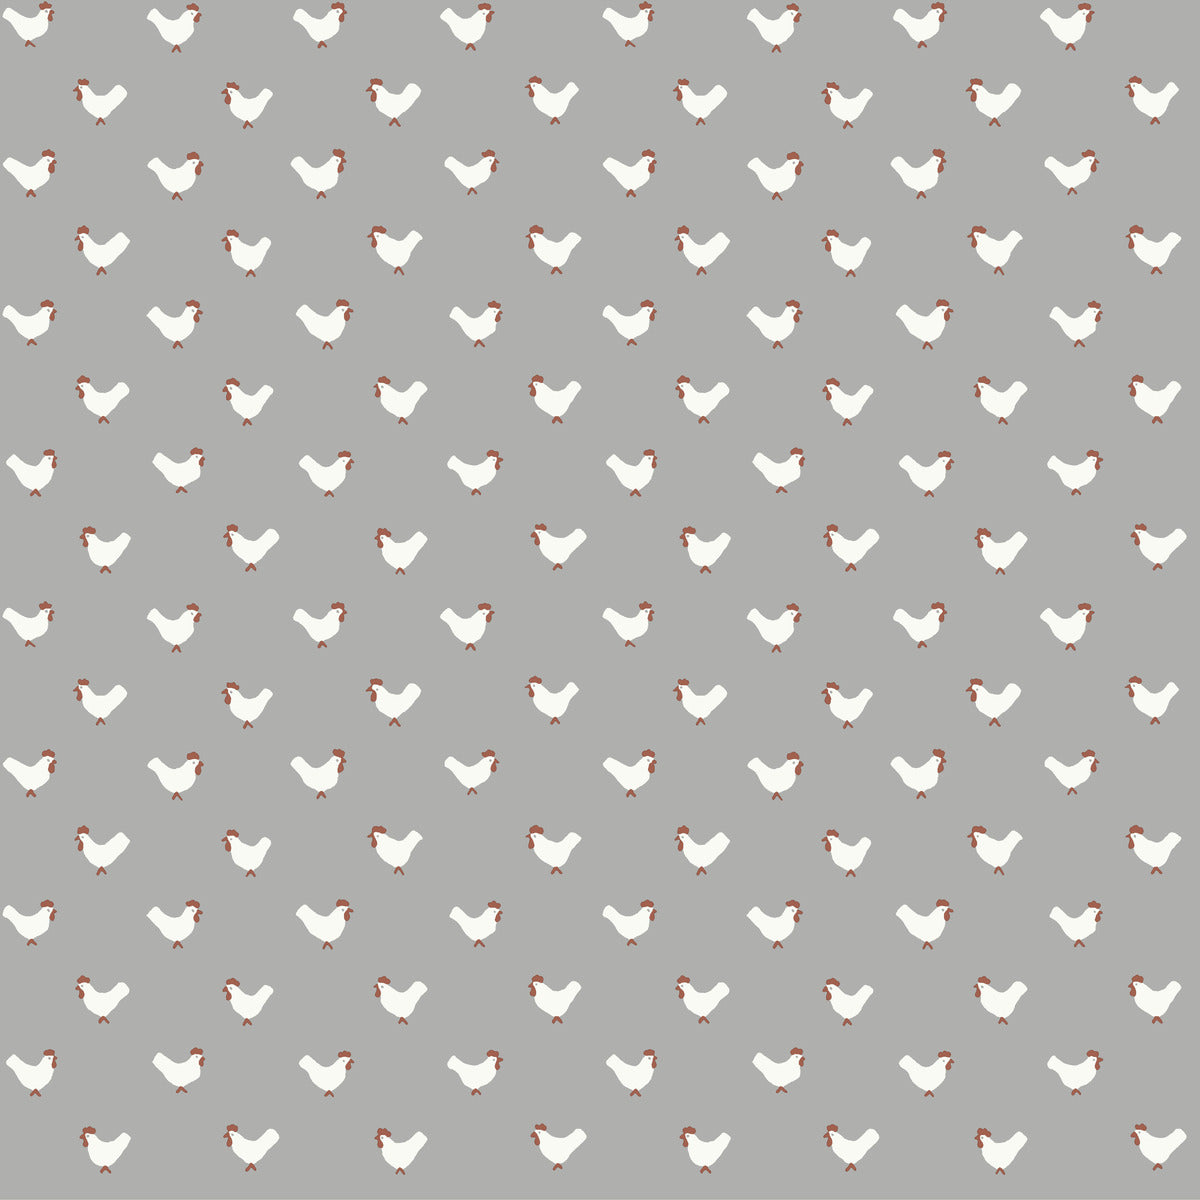 Simply Farmhouse Roost Wallpaper - SAMPLE